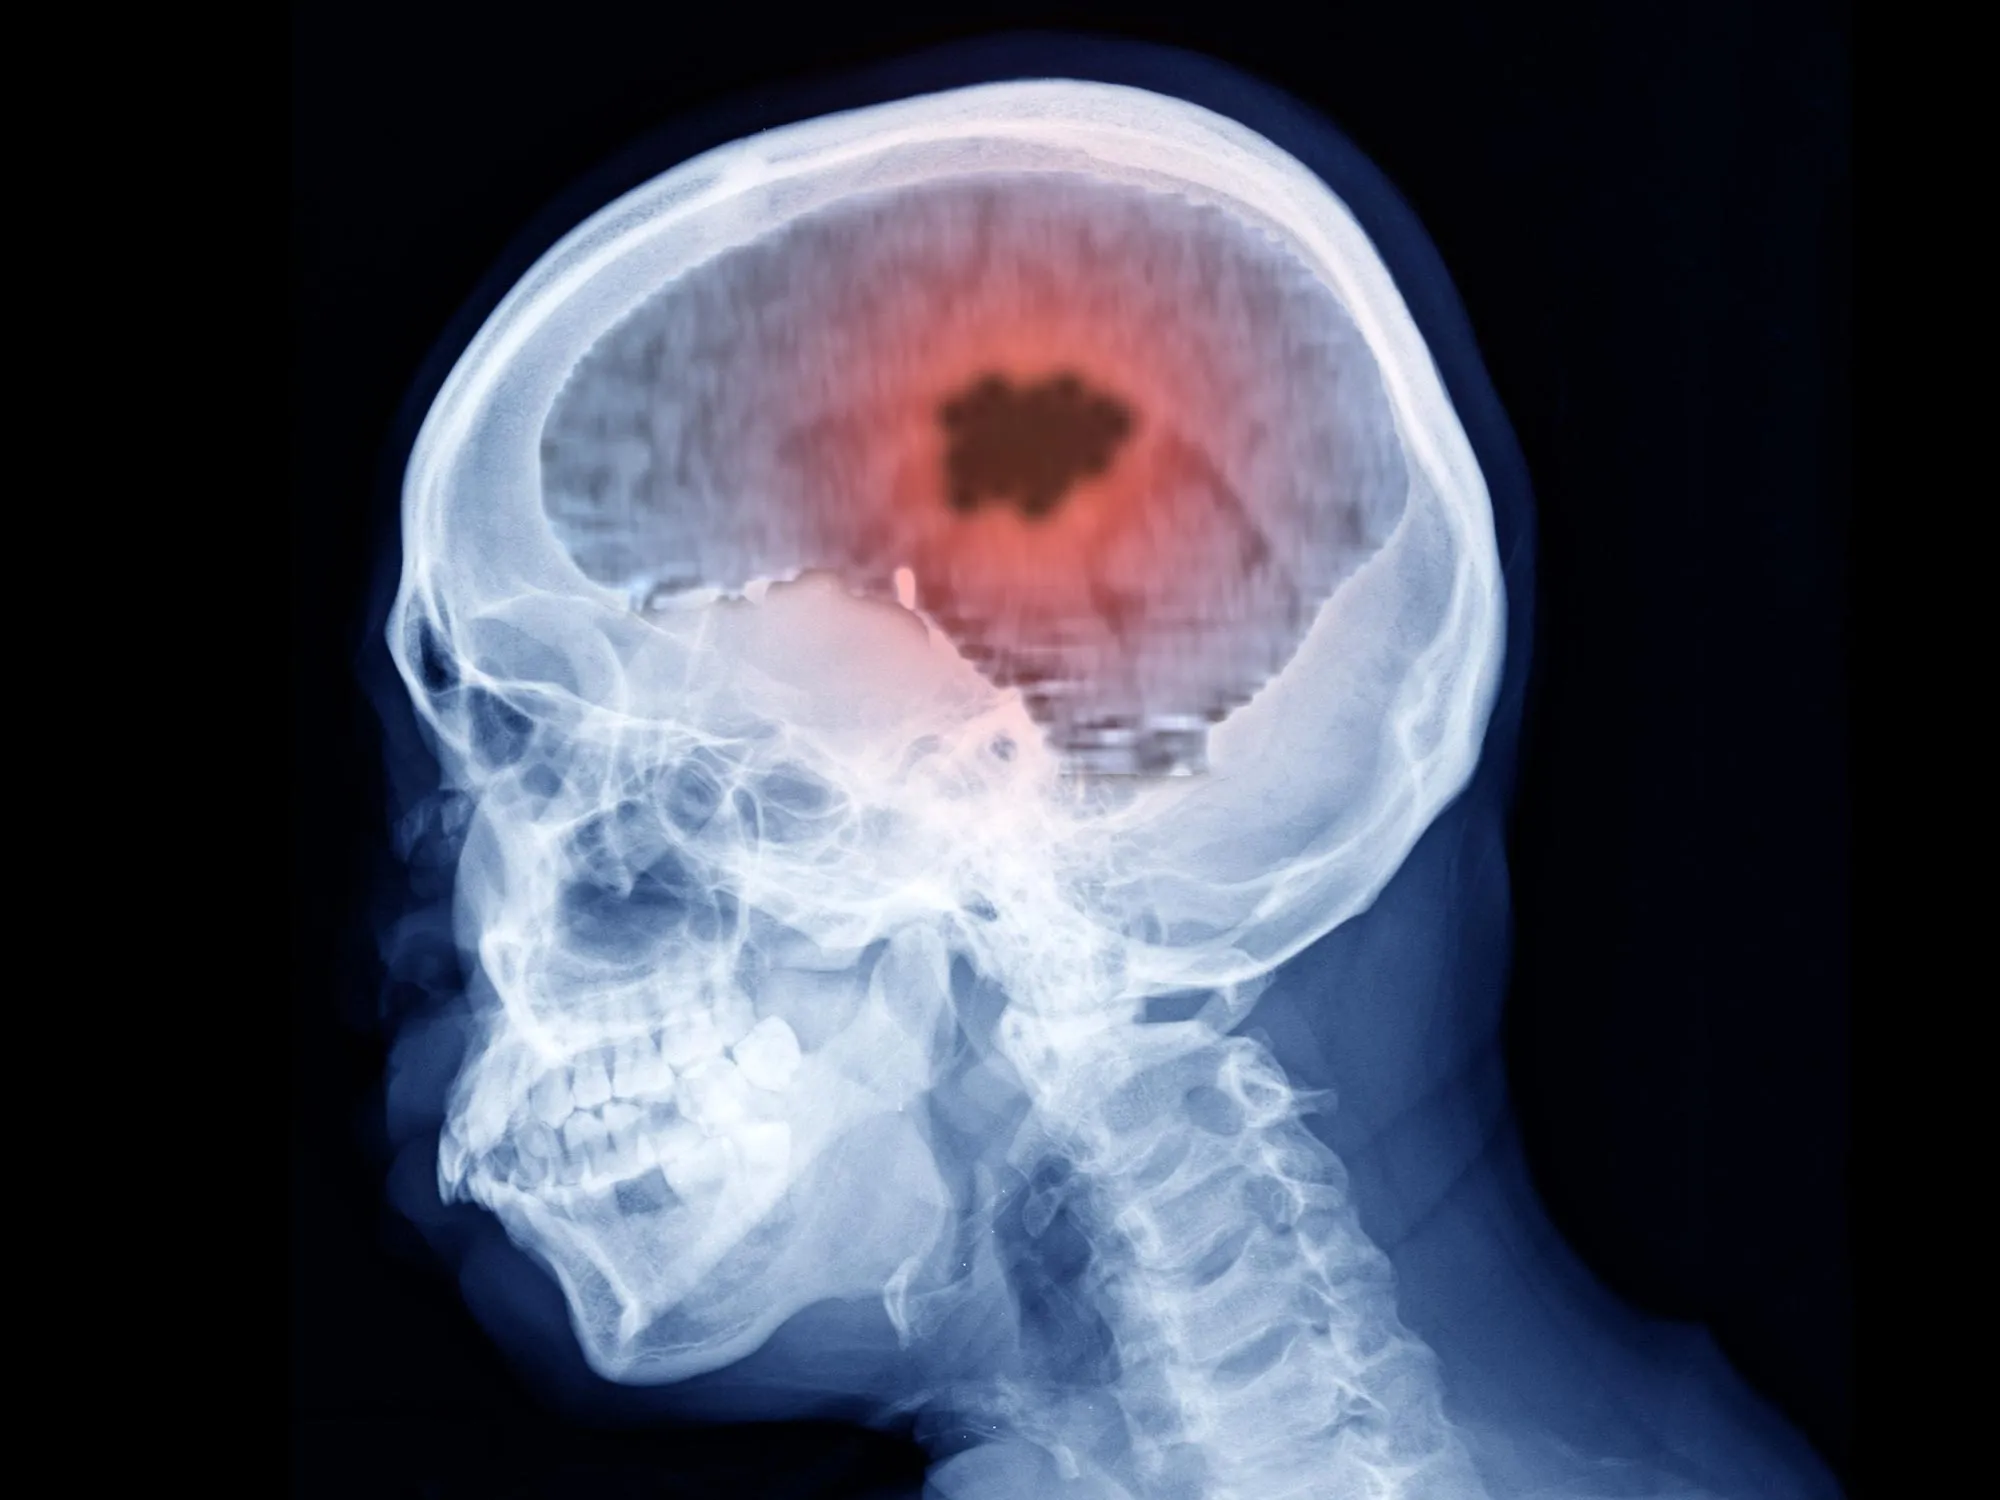 CDC Study Reveals Covid Vaccines Linked to 111,795% Increase in Brain Clots